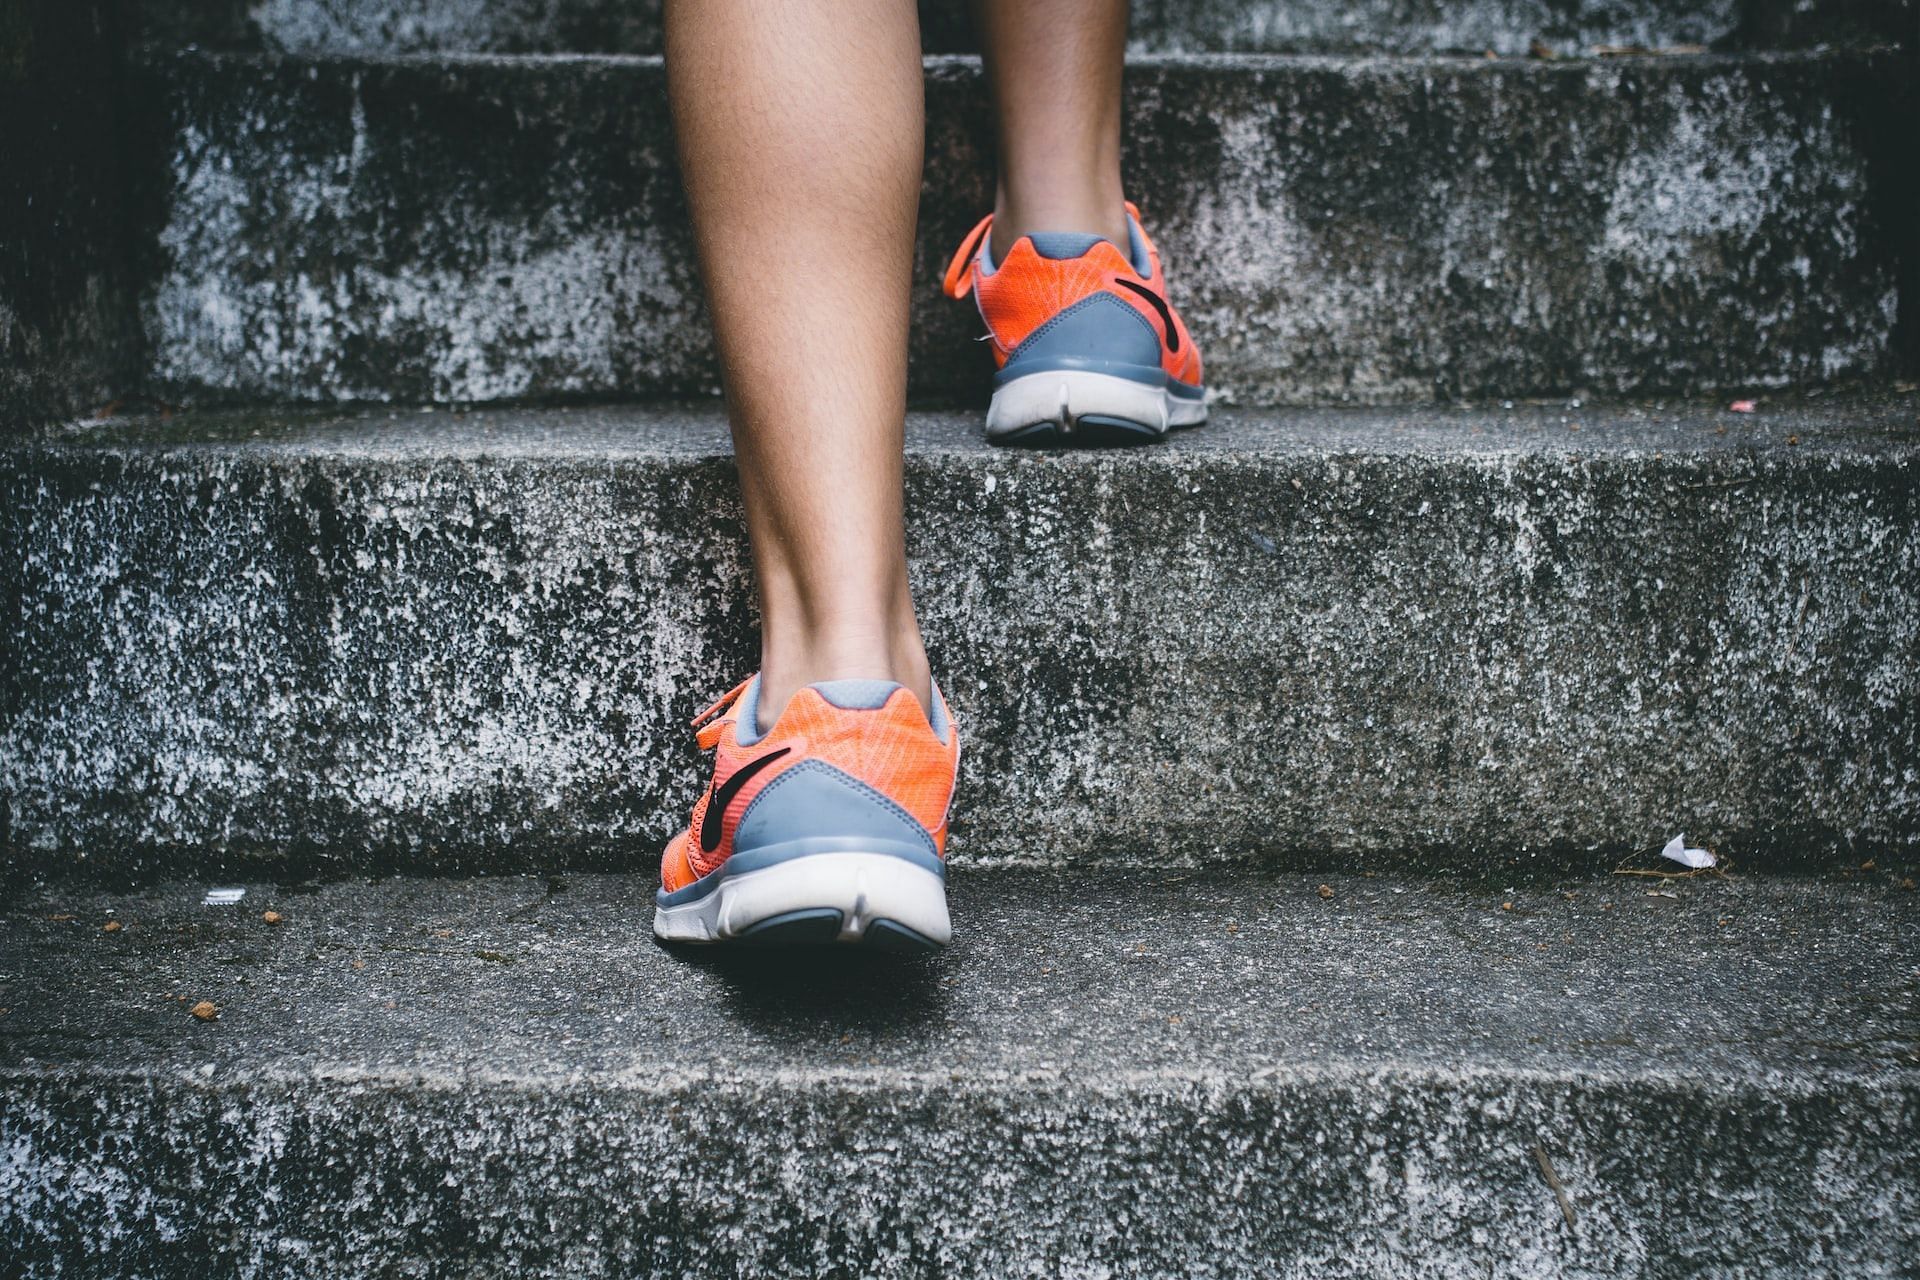 A stair climber workout can help with weight loss. (Photo via Bruno Nascimento/Unsplash)